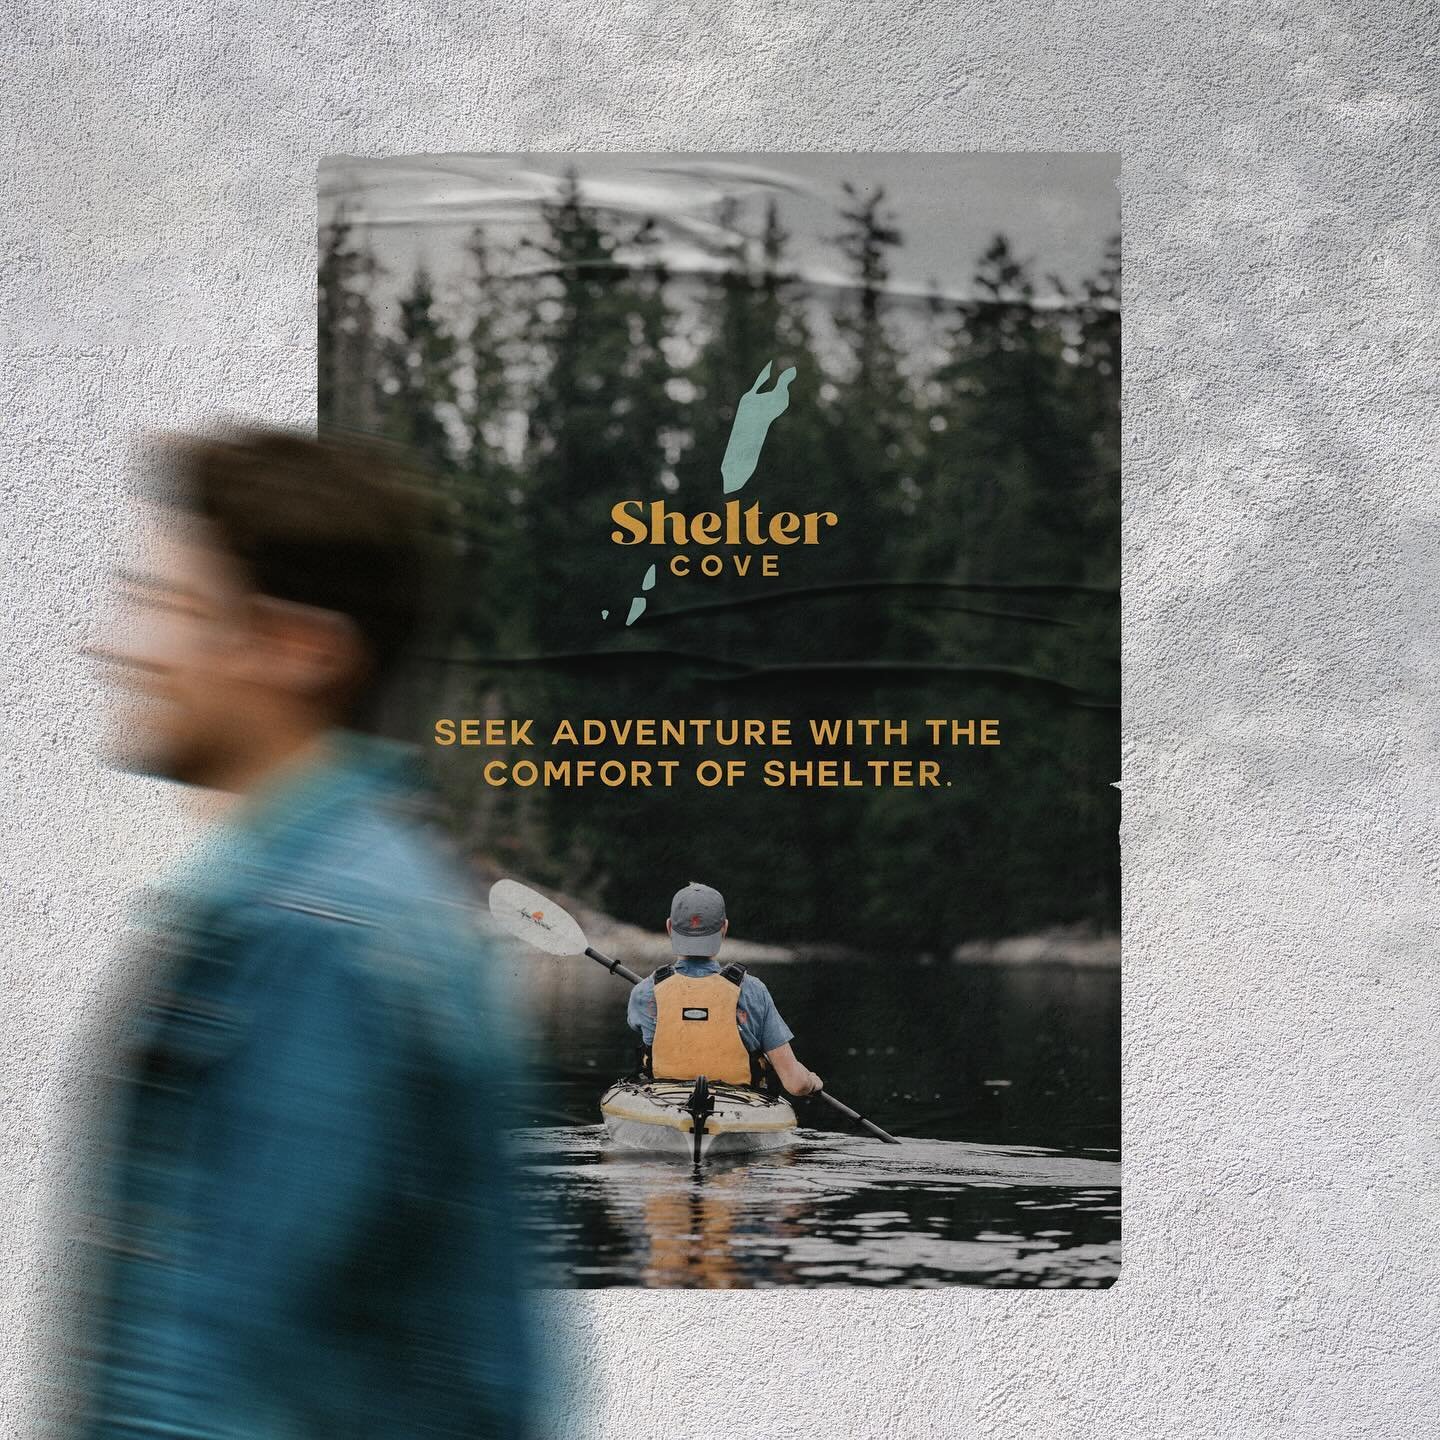 full brand package for shelter cove in upstate ny.

a nod to adventure, comfort and play. designed to give the property plenty of freedom for print, digital, signage and more. a cohesive brand to fit a younger demographic of dwellers.

brand / collat